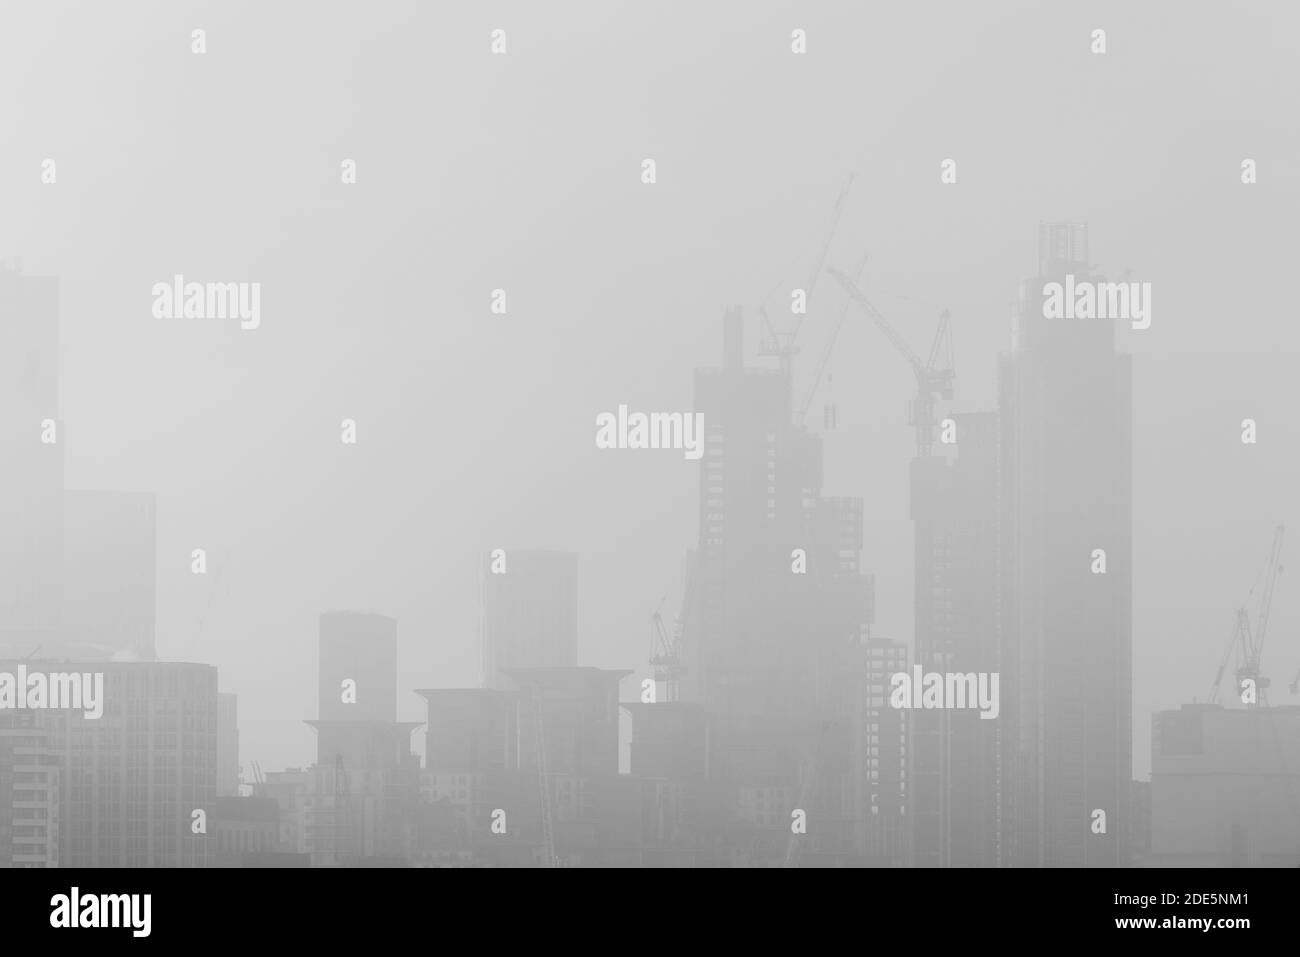 Construction background with copy space in black and white, London cityscape background with tall skyscrapers and office blocks and misty city buildings, England, UK, Europe Stock Photo